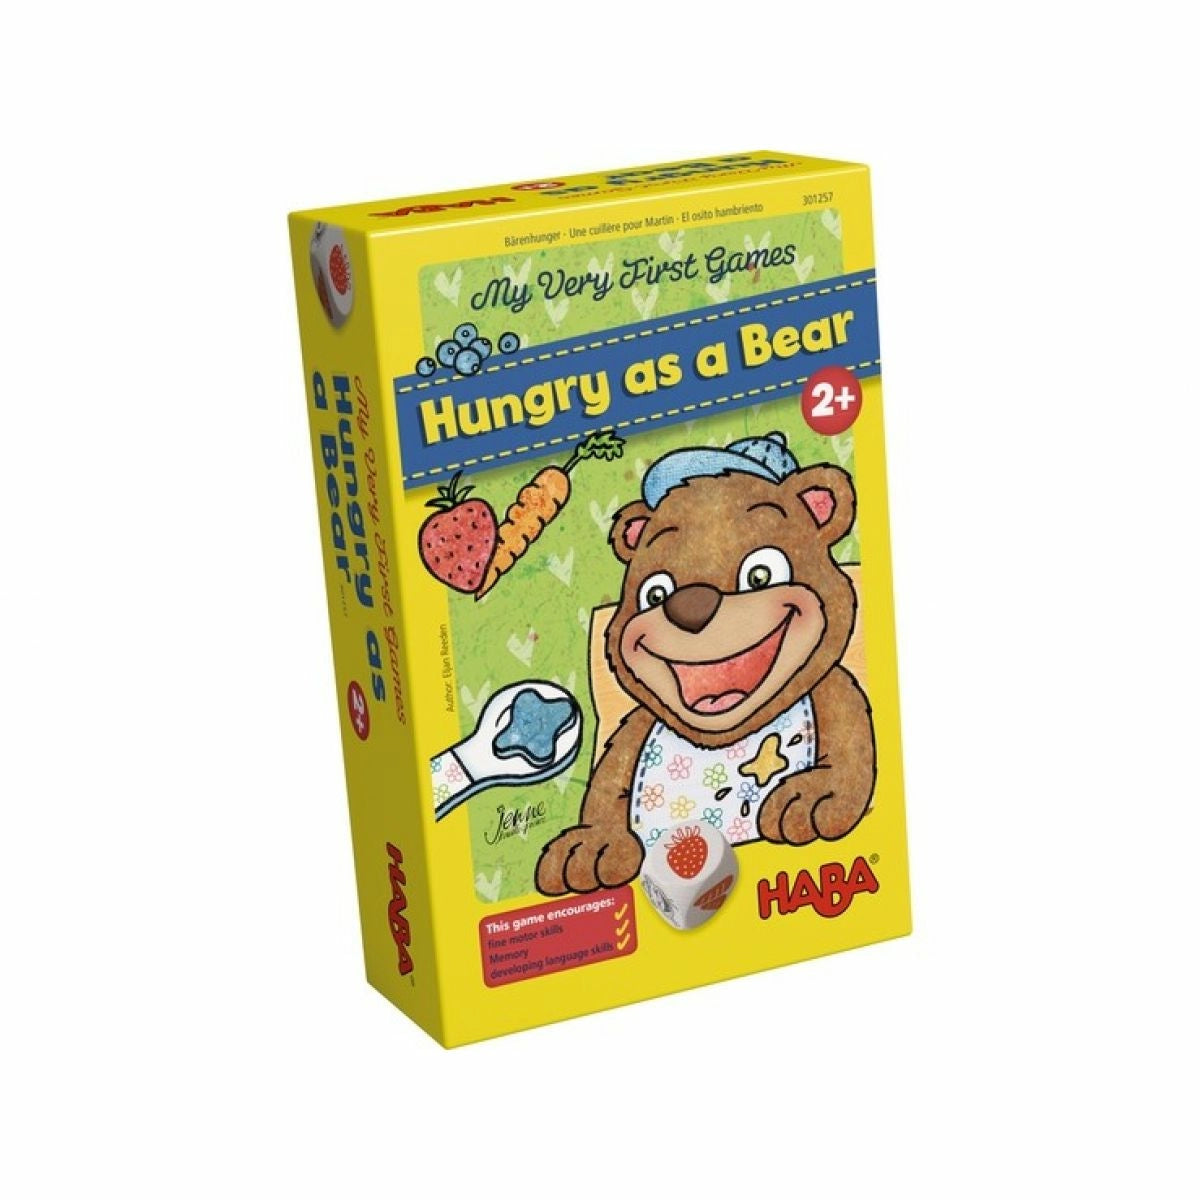 Haba My Very First Games - Hungry as a Bear Game